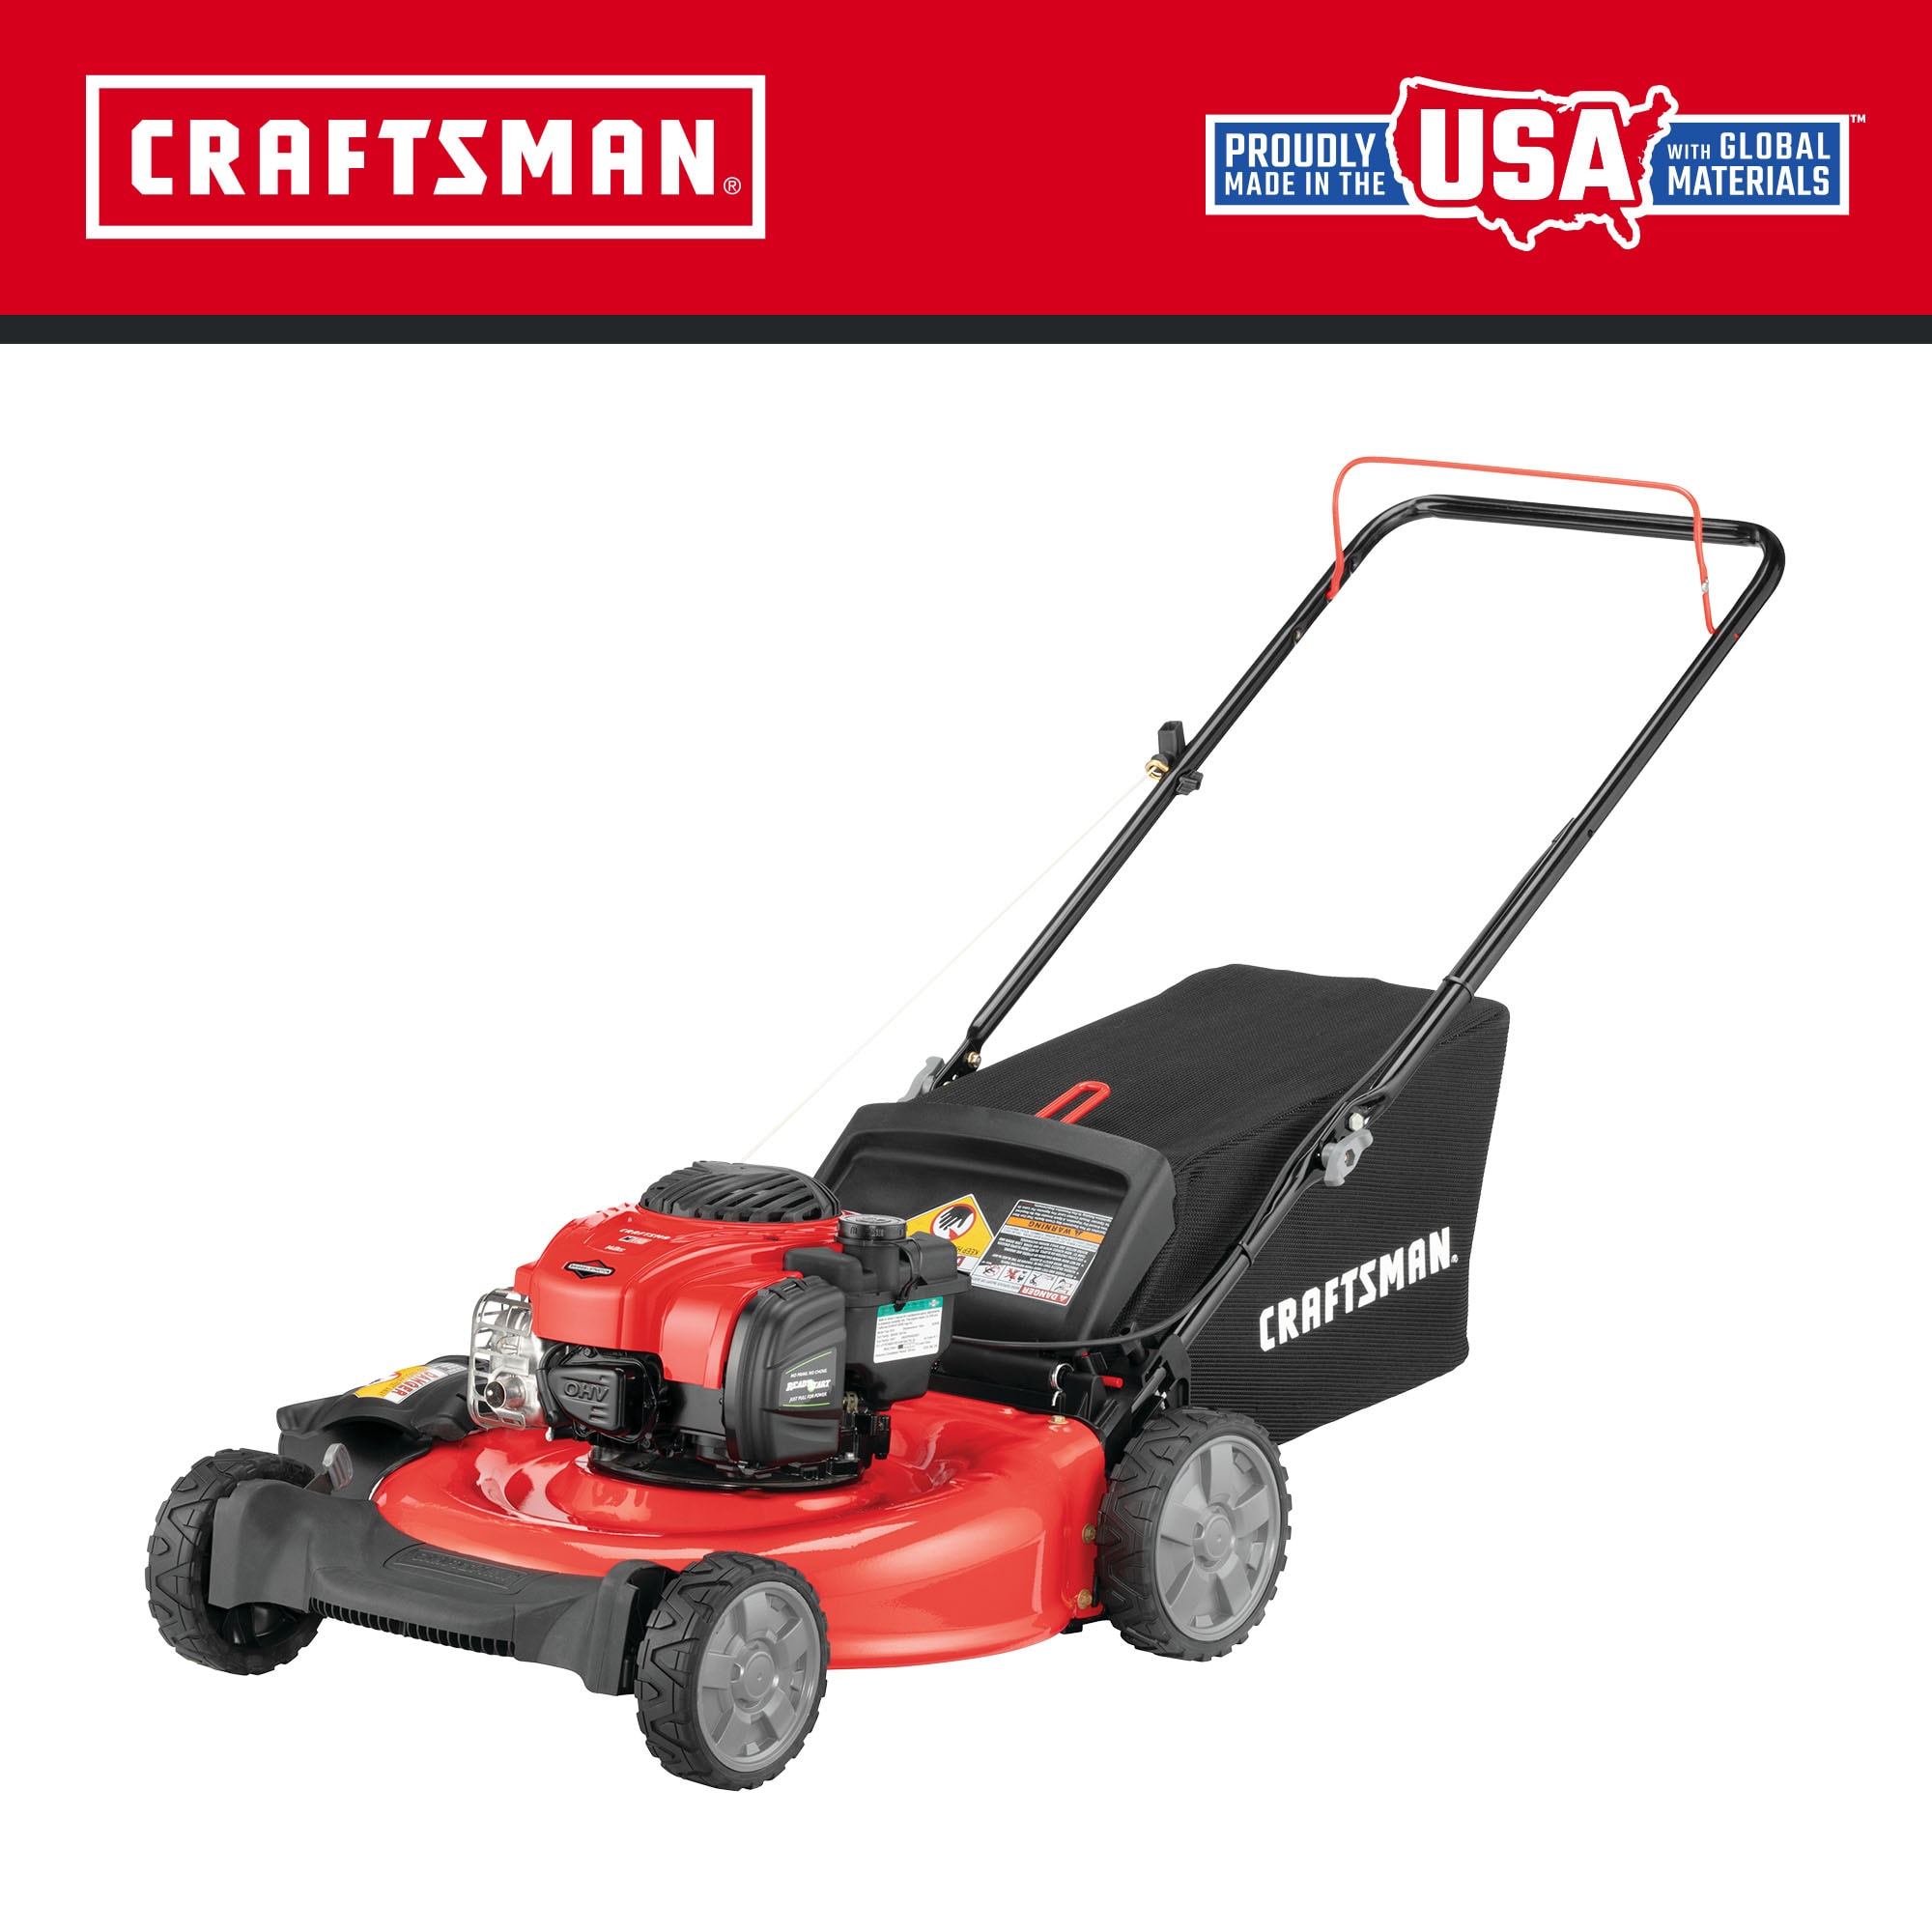 CRAFTSMAN M090 125-cc 20-in Gas Push Lawn Mower with Briggs and